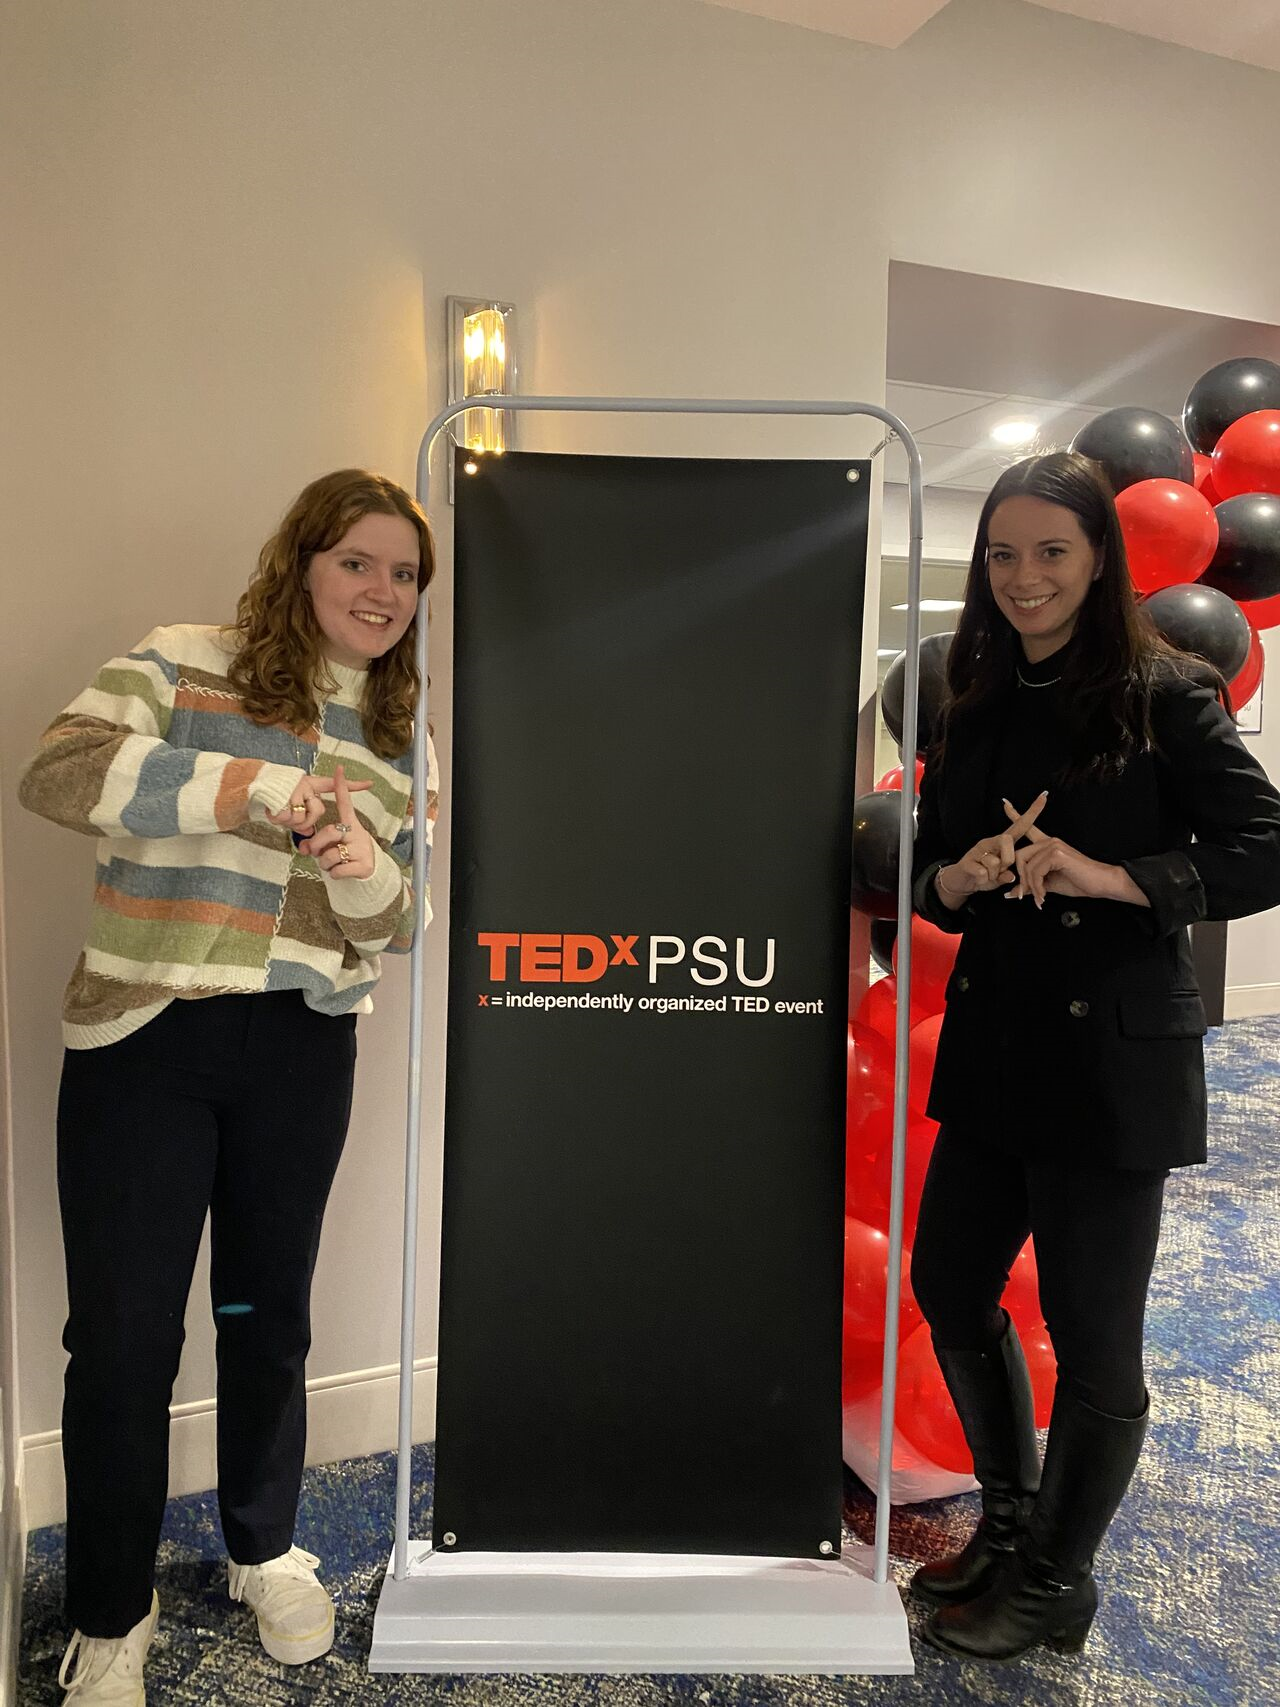 Natalie and Renee pose next to a TEDxPSU sign.